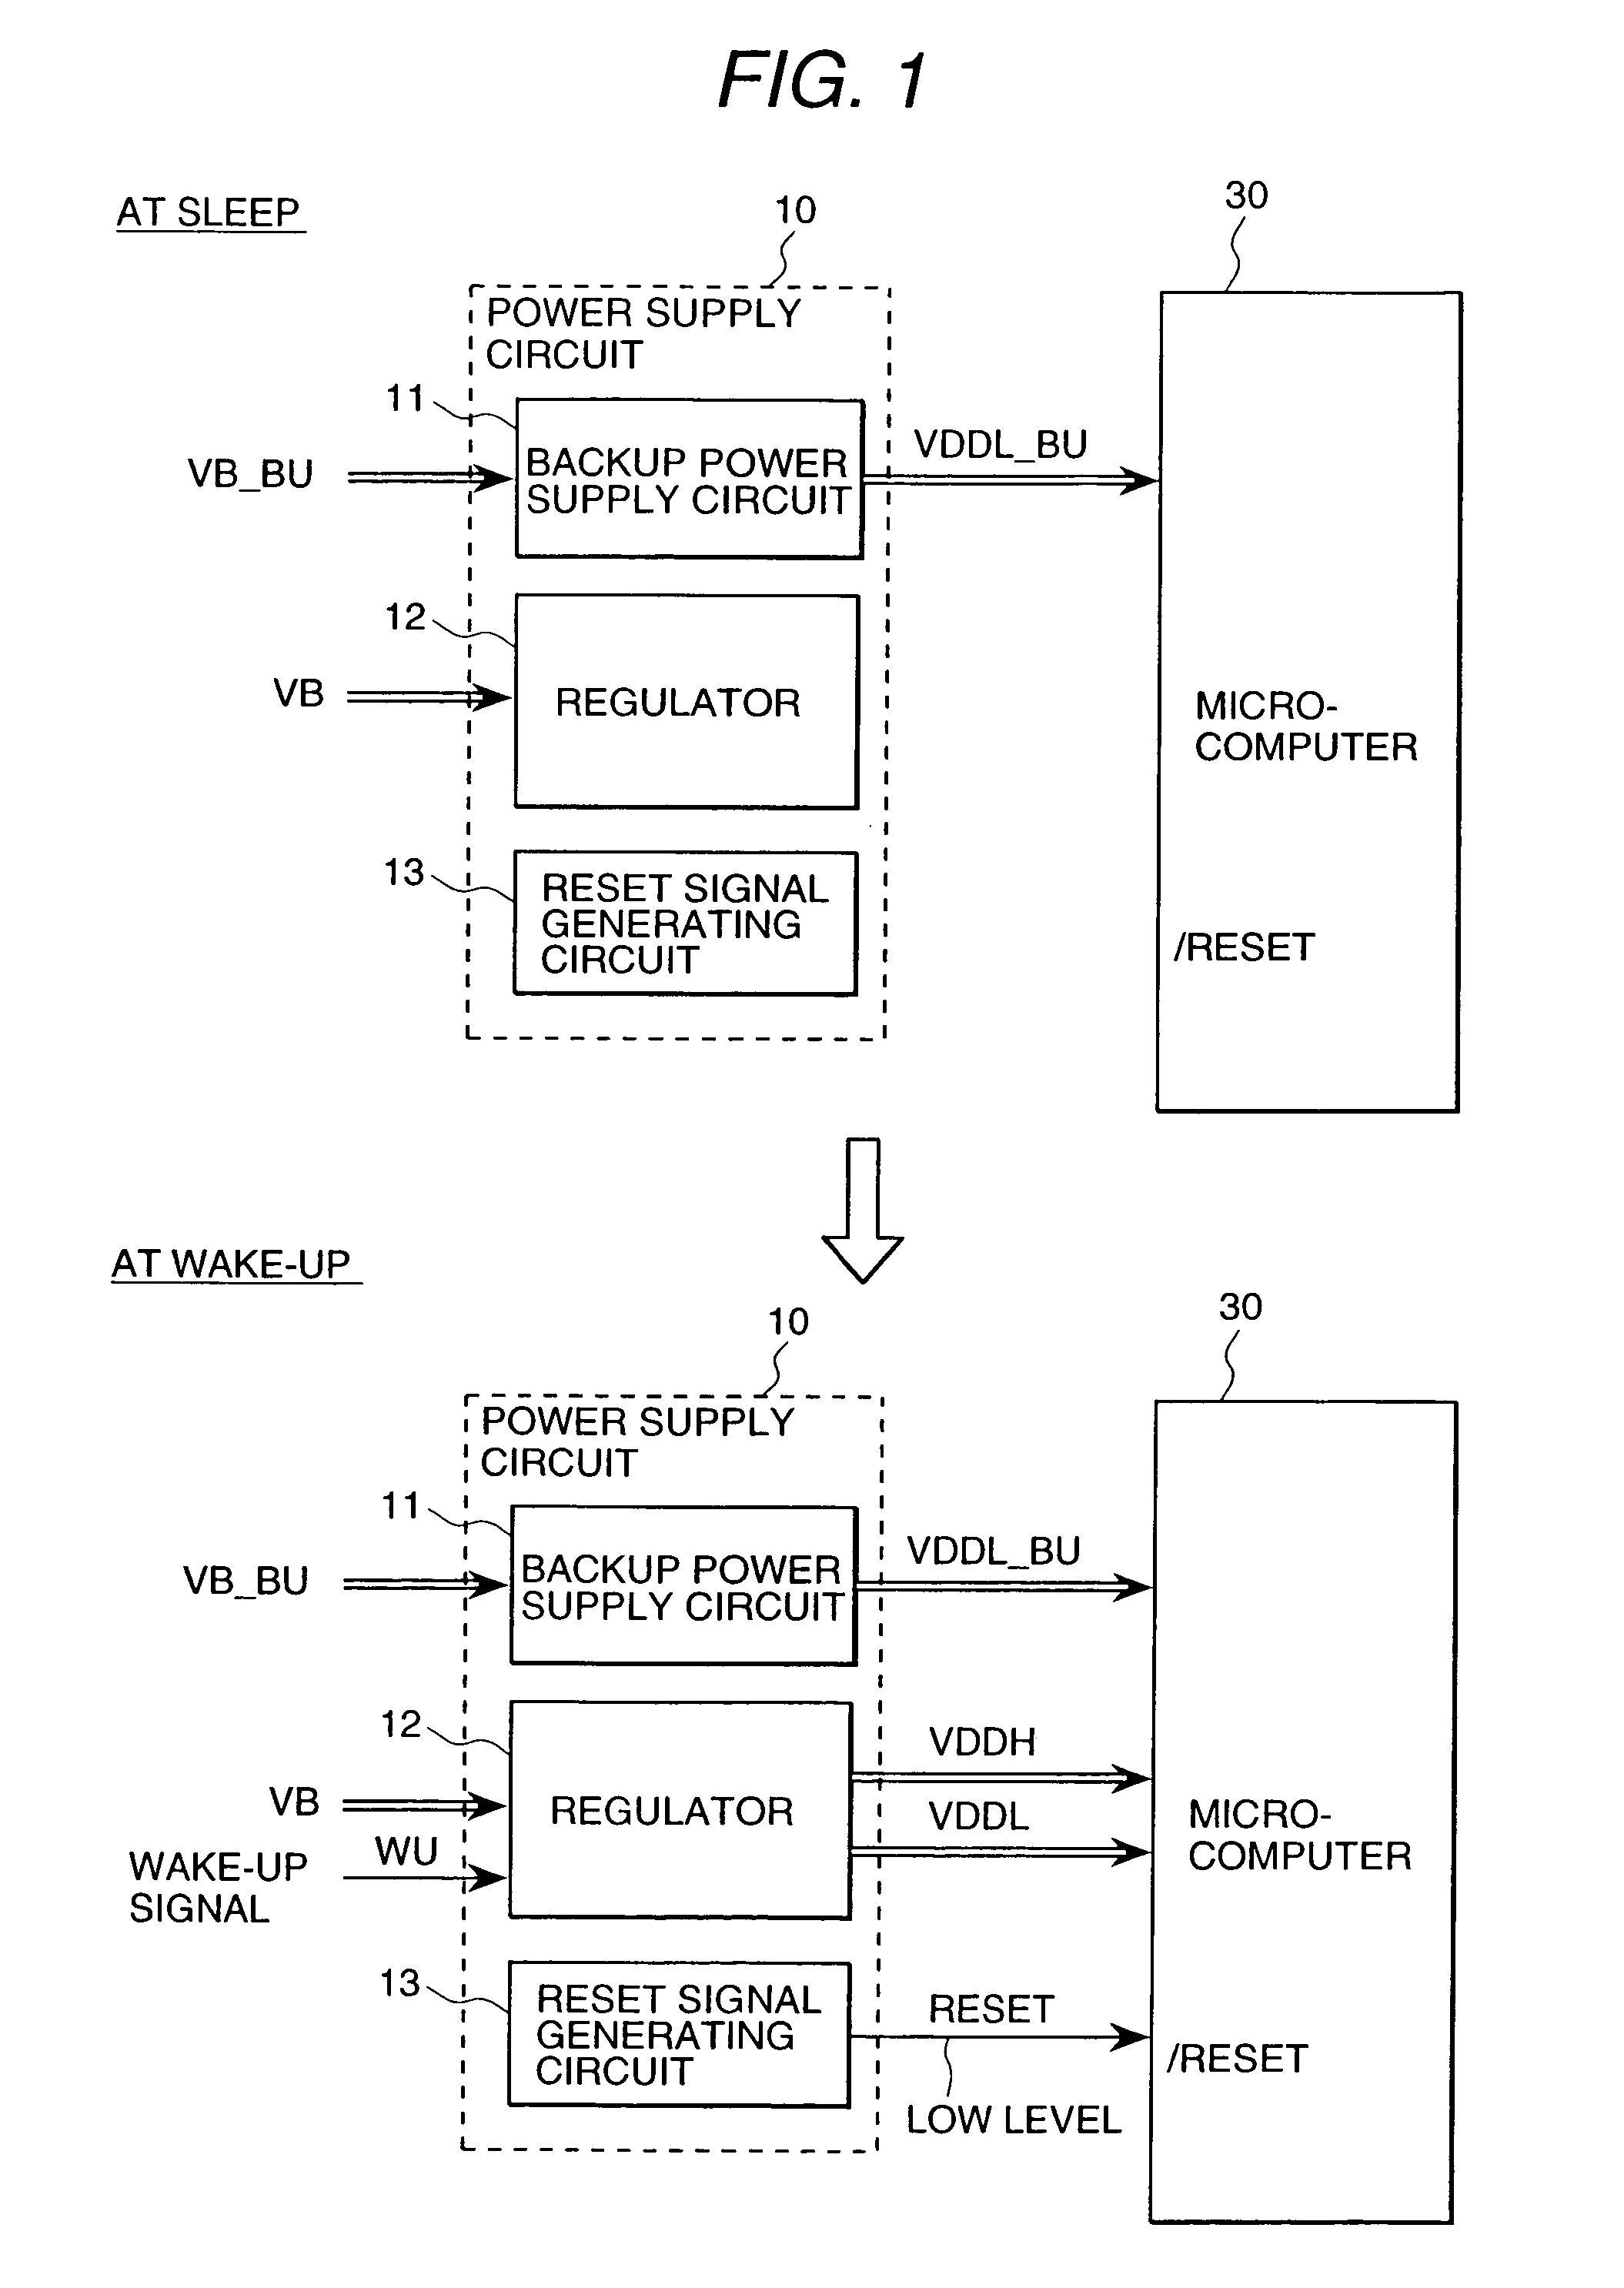 Electrical control unit for an automobile